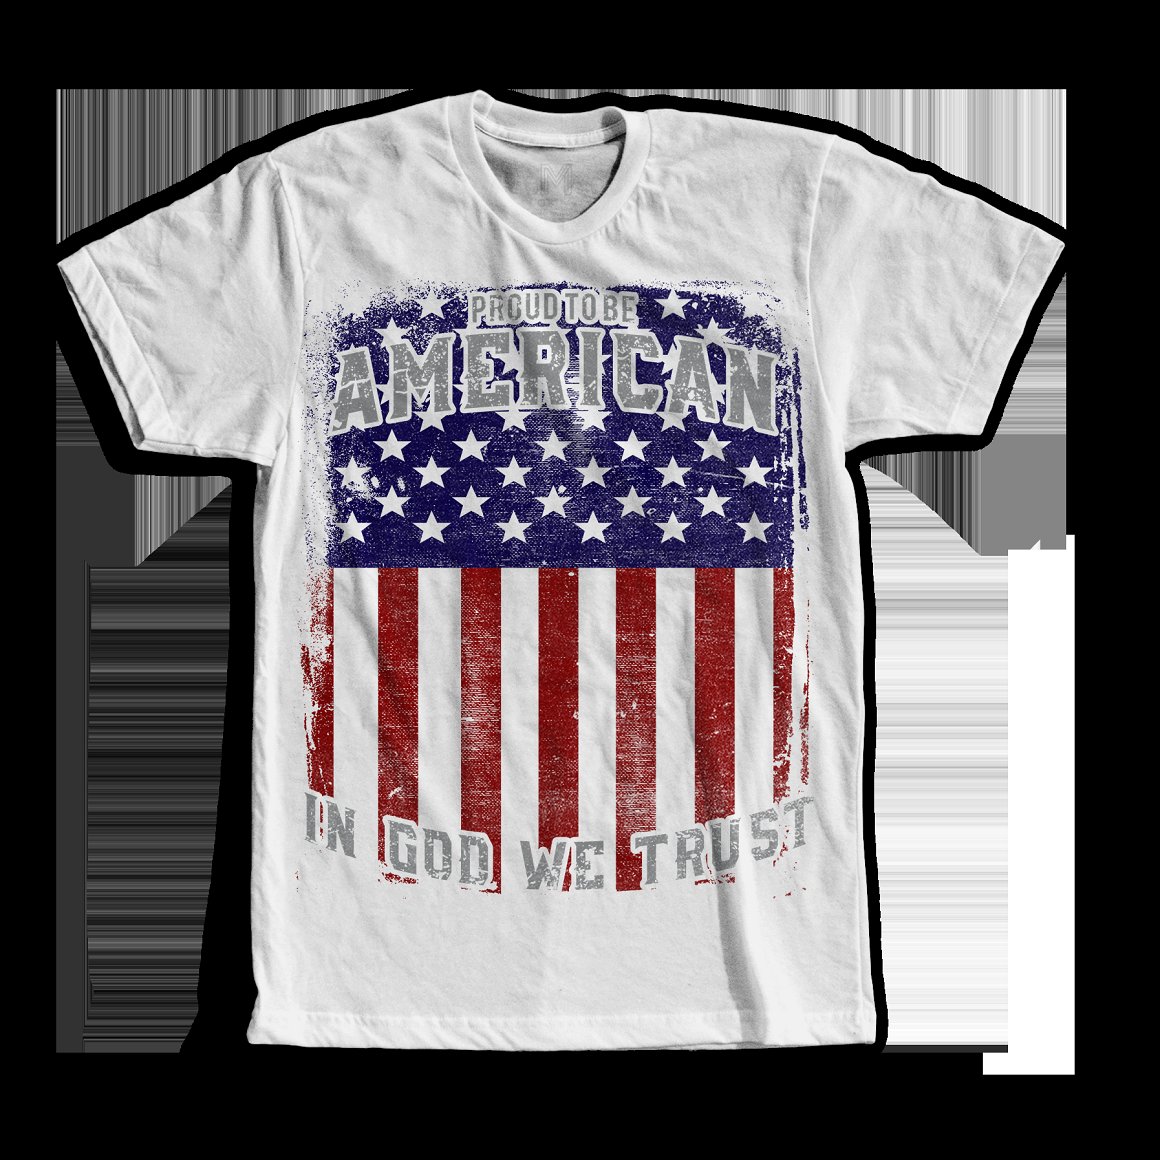 White T-shirt with colorful American flag print.